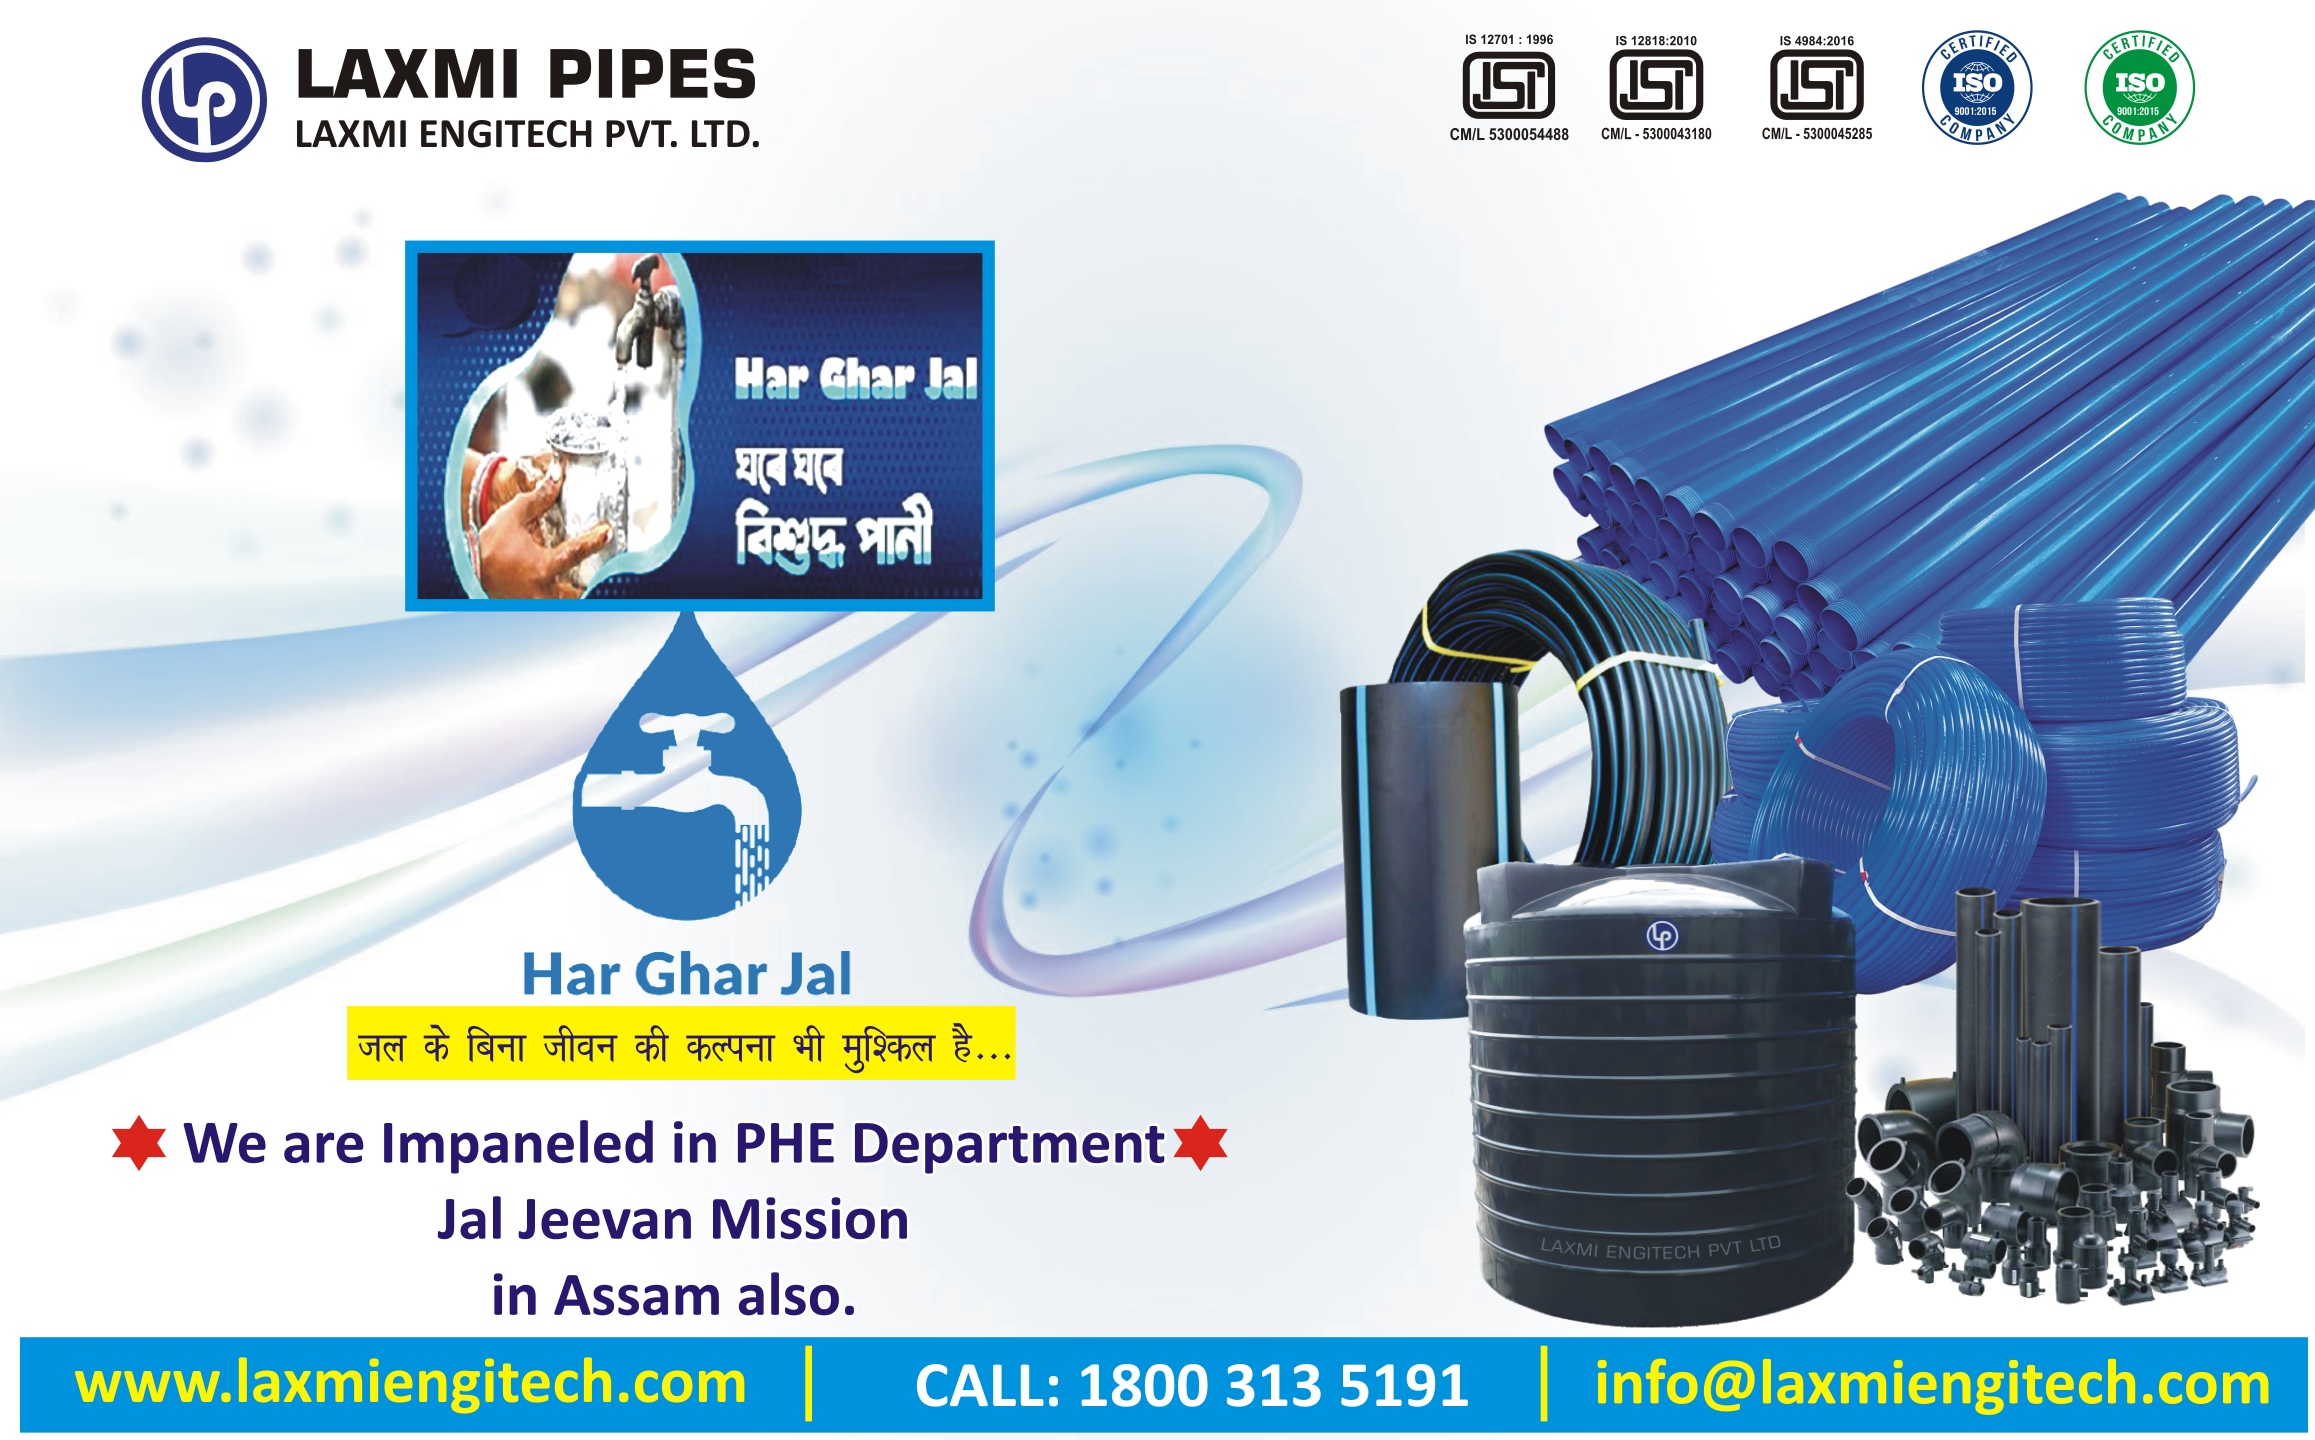 Contact for HDPE Pipes, MDPE Pipes, uPVC Pipes and Fittings